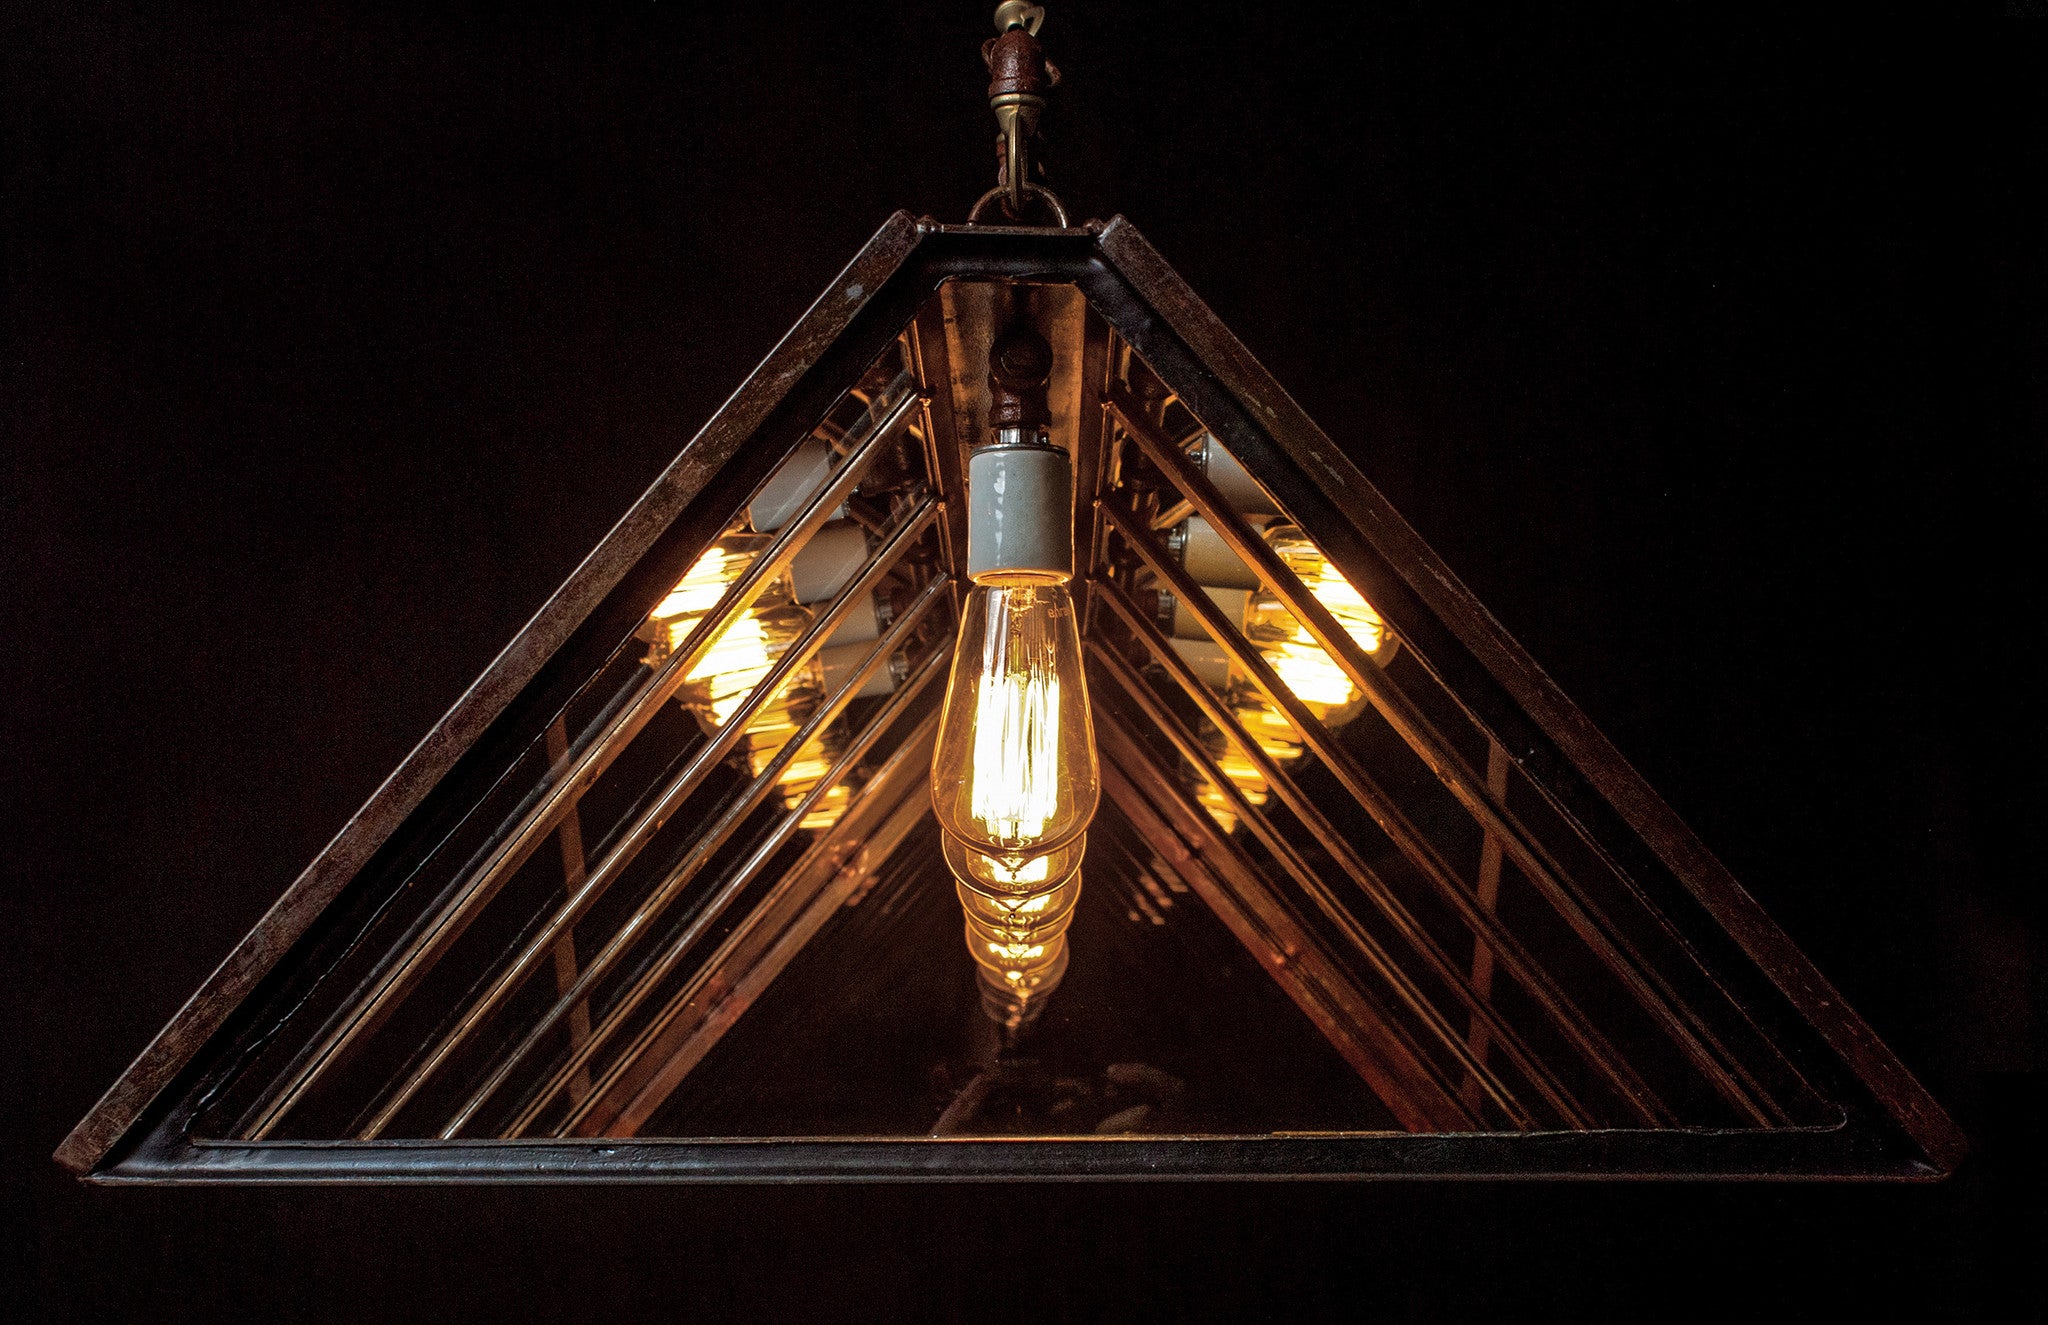 An industrial-style chandelier with five exposed vintage Edison bulbs by Hester &amp; Cook&